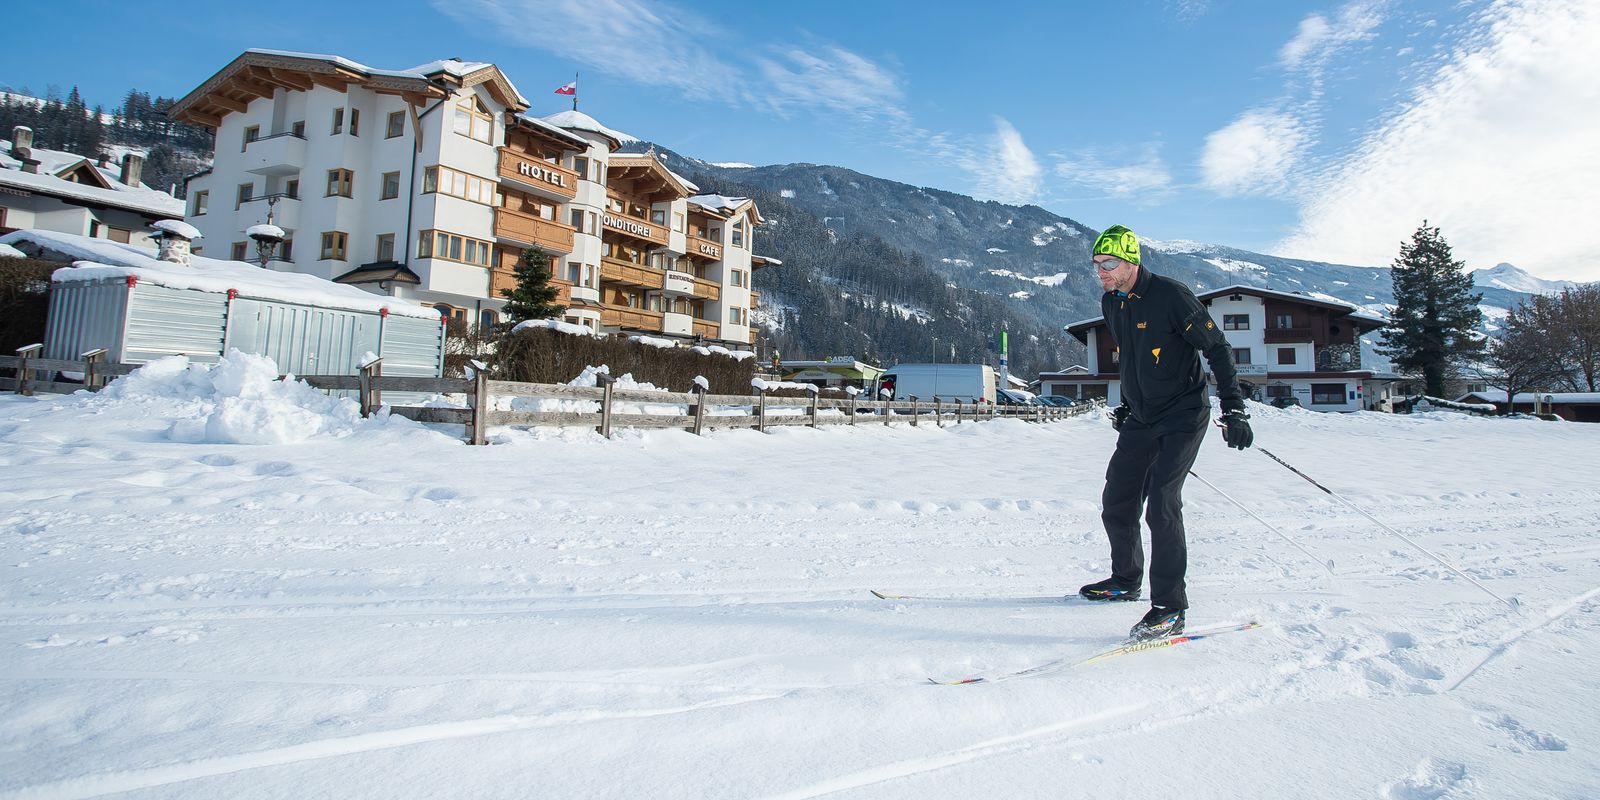 Cross-country skiing in the Zillertal